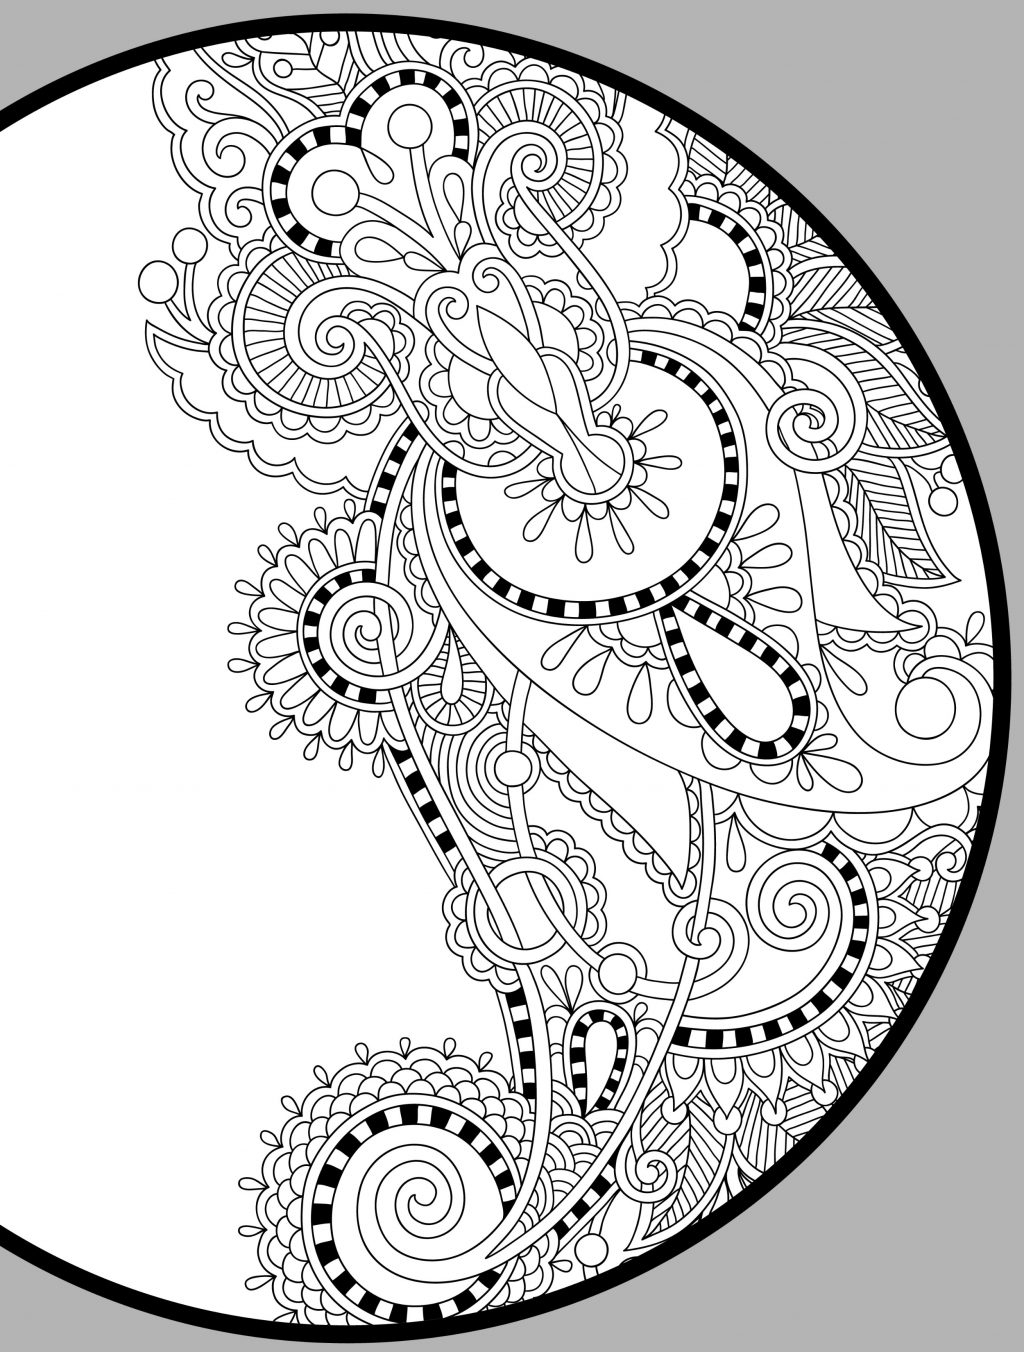 How To Print Coloring Pages Coloring Ideas Free Printable Holiday Adult Coloring Pages